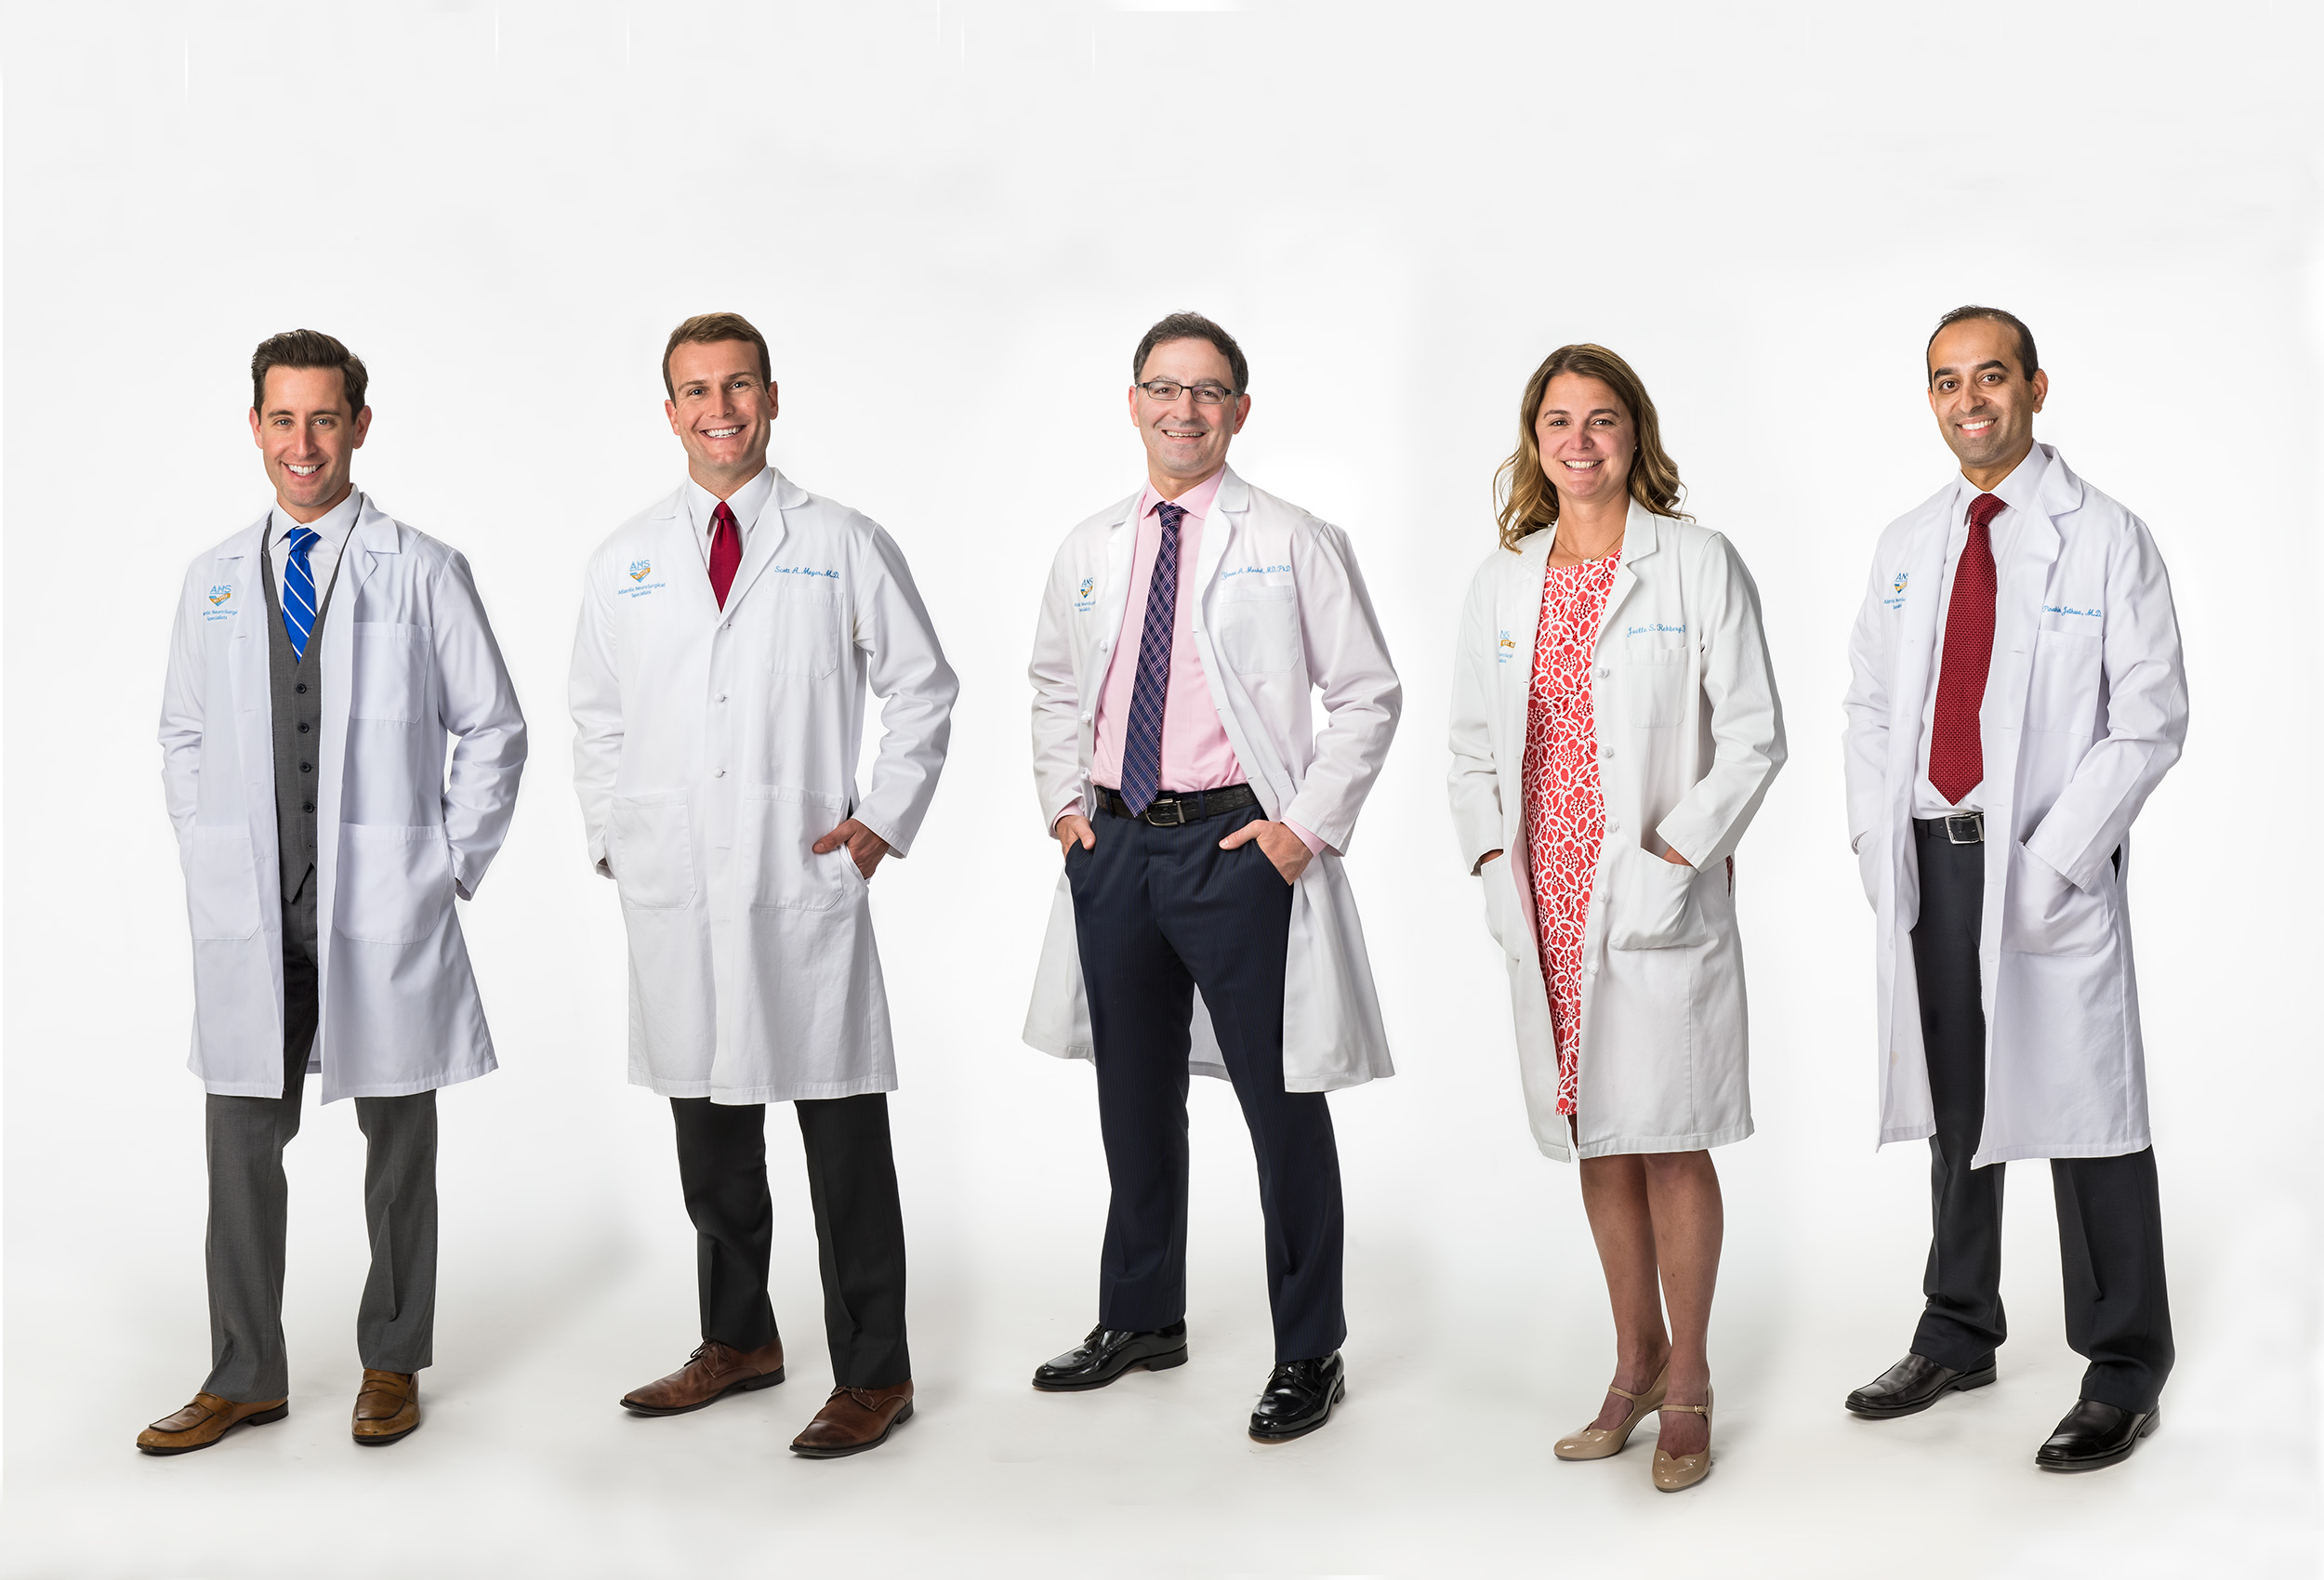 Atlantic Neurosurgical Specialists group photo on white background